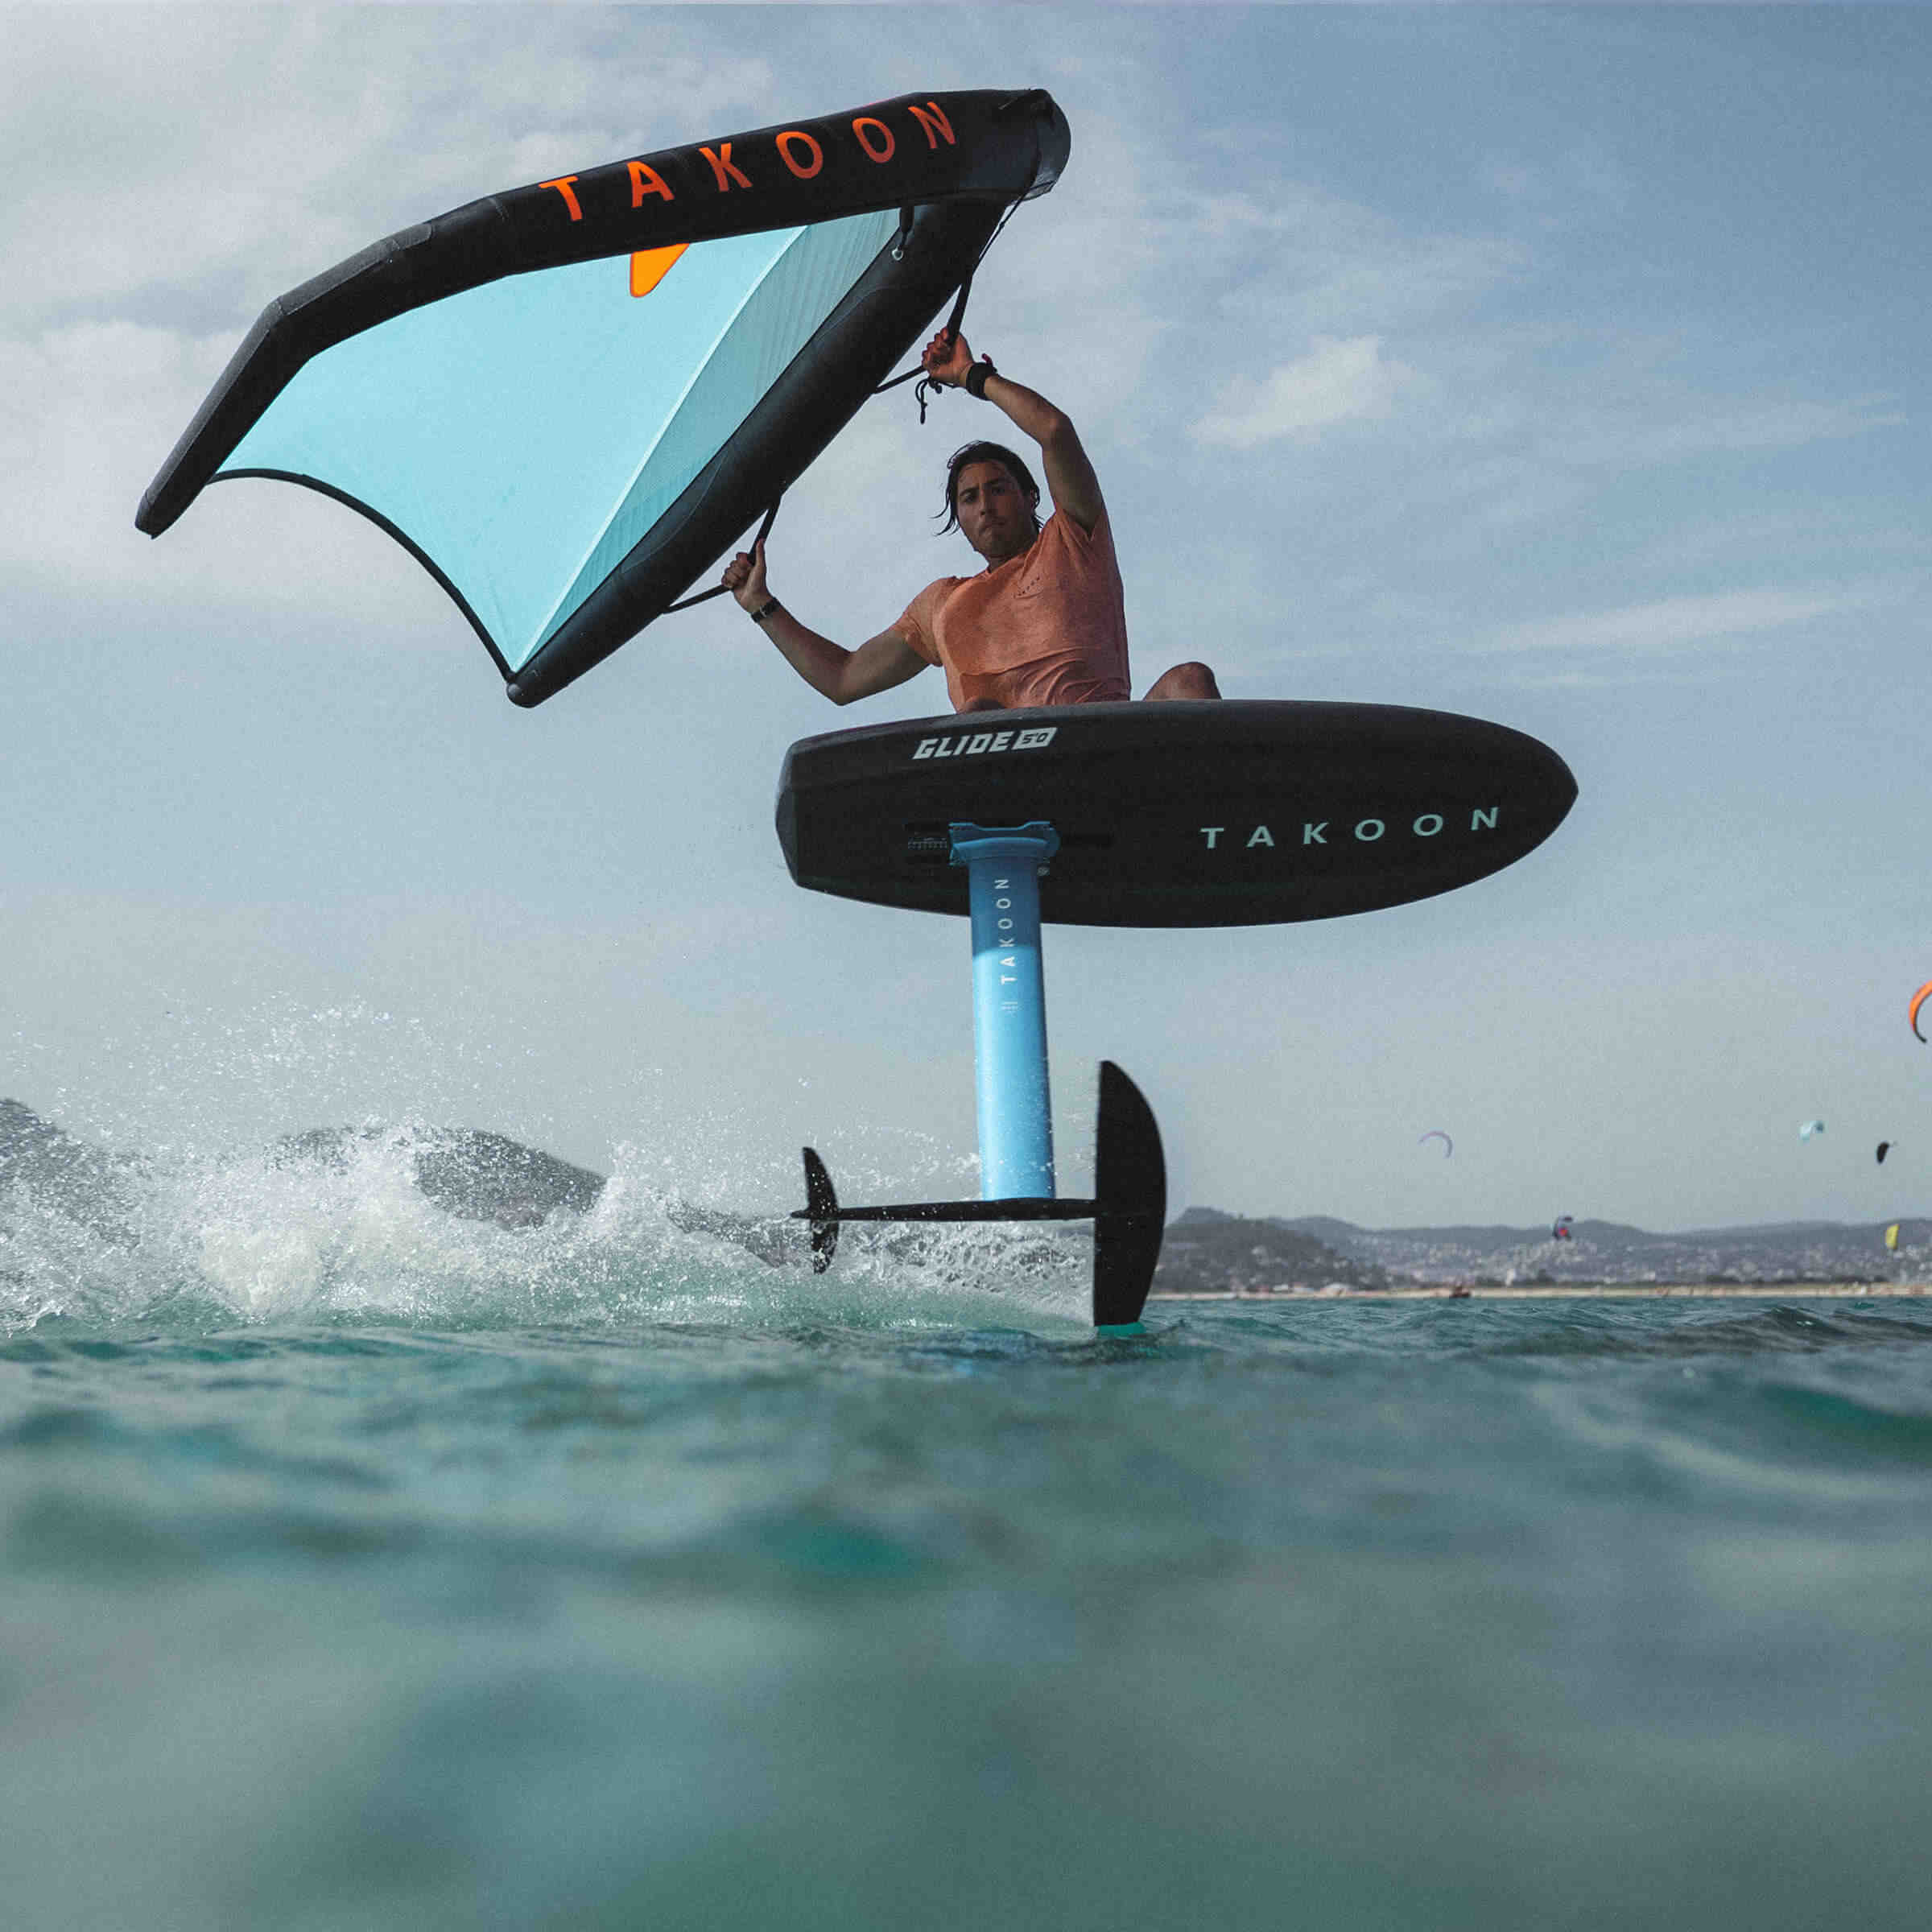 Is foiling harder than surfing?